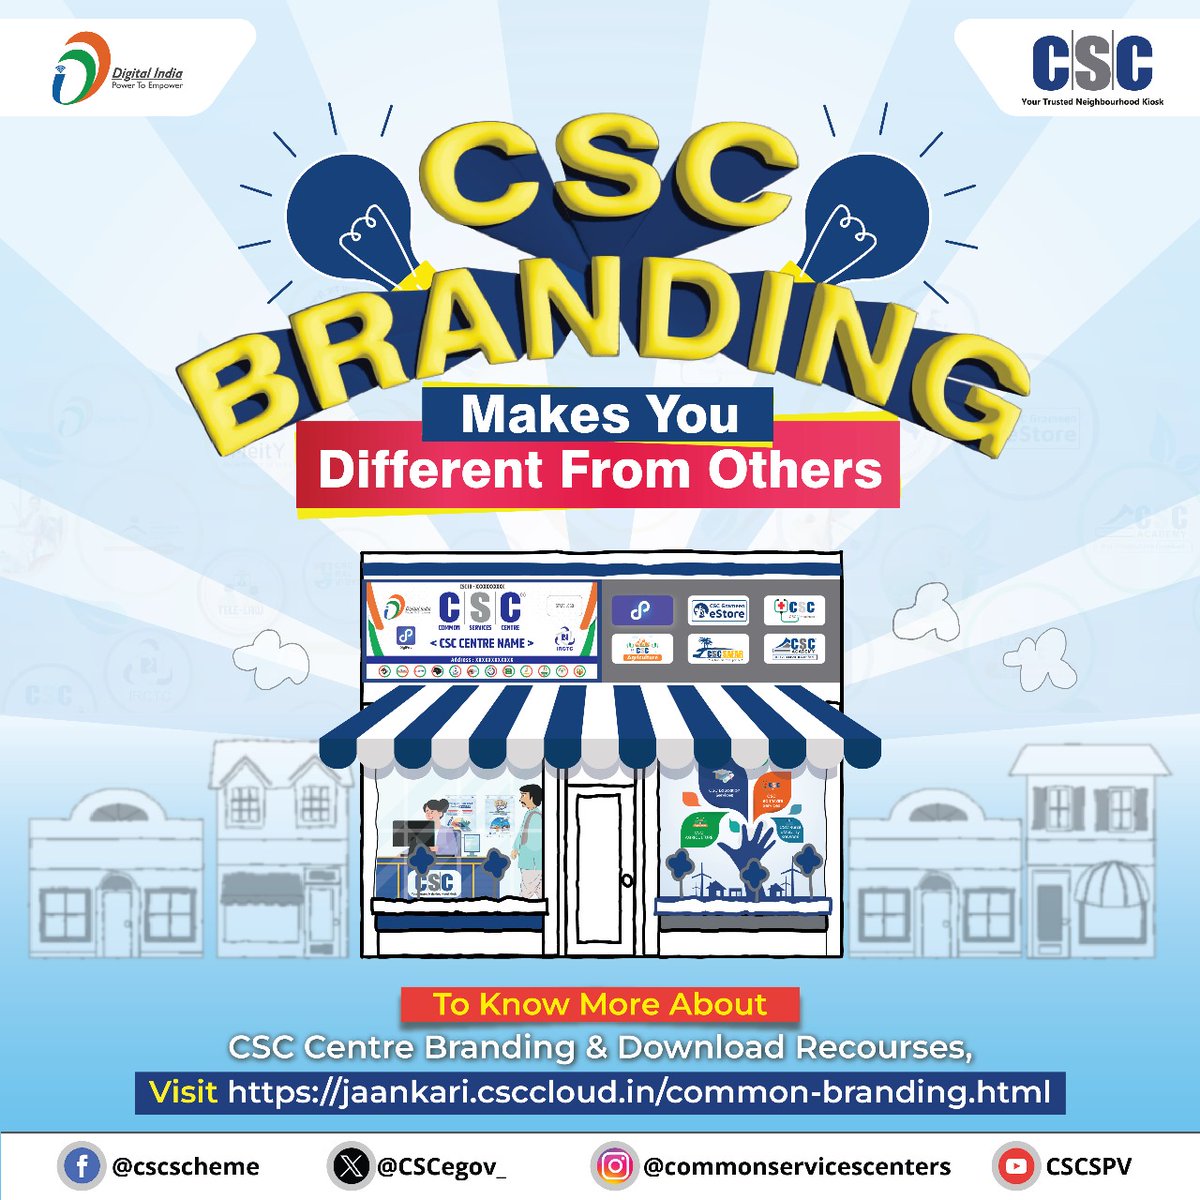 Dear VLEs, Don't forget to Update your Centre with the New Branding... Visit the following link to learn about #CSC Centre branding & download recourses now. jaankari.csccloud.in/common-brandin… #DigitalIndia #CSCBranding #CSCJaankariSuvidhaPostal #DigitalInclusion #JaankariSuvidhaPortal